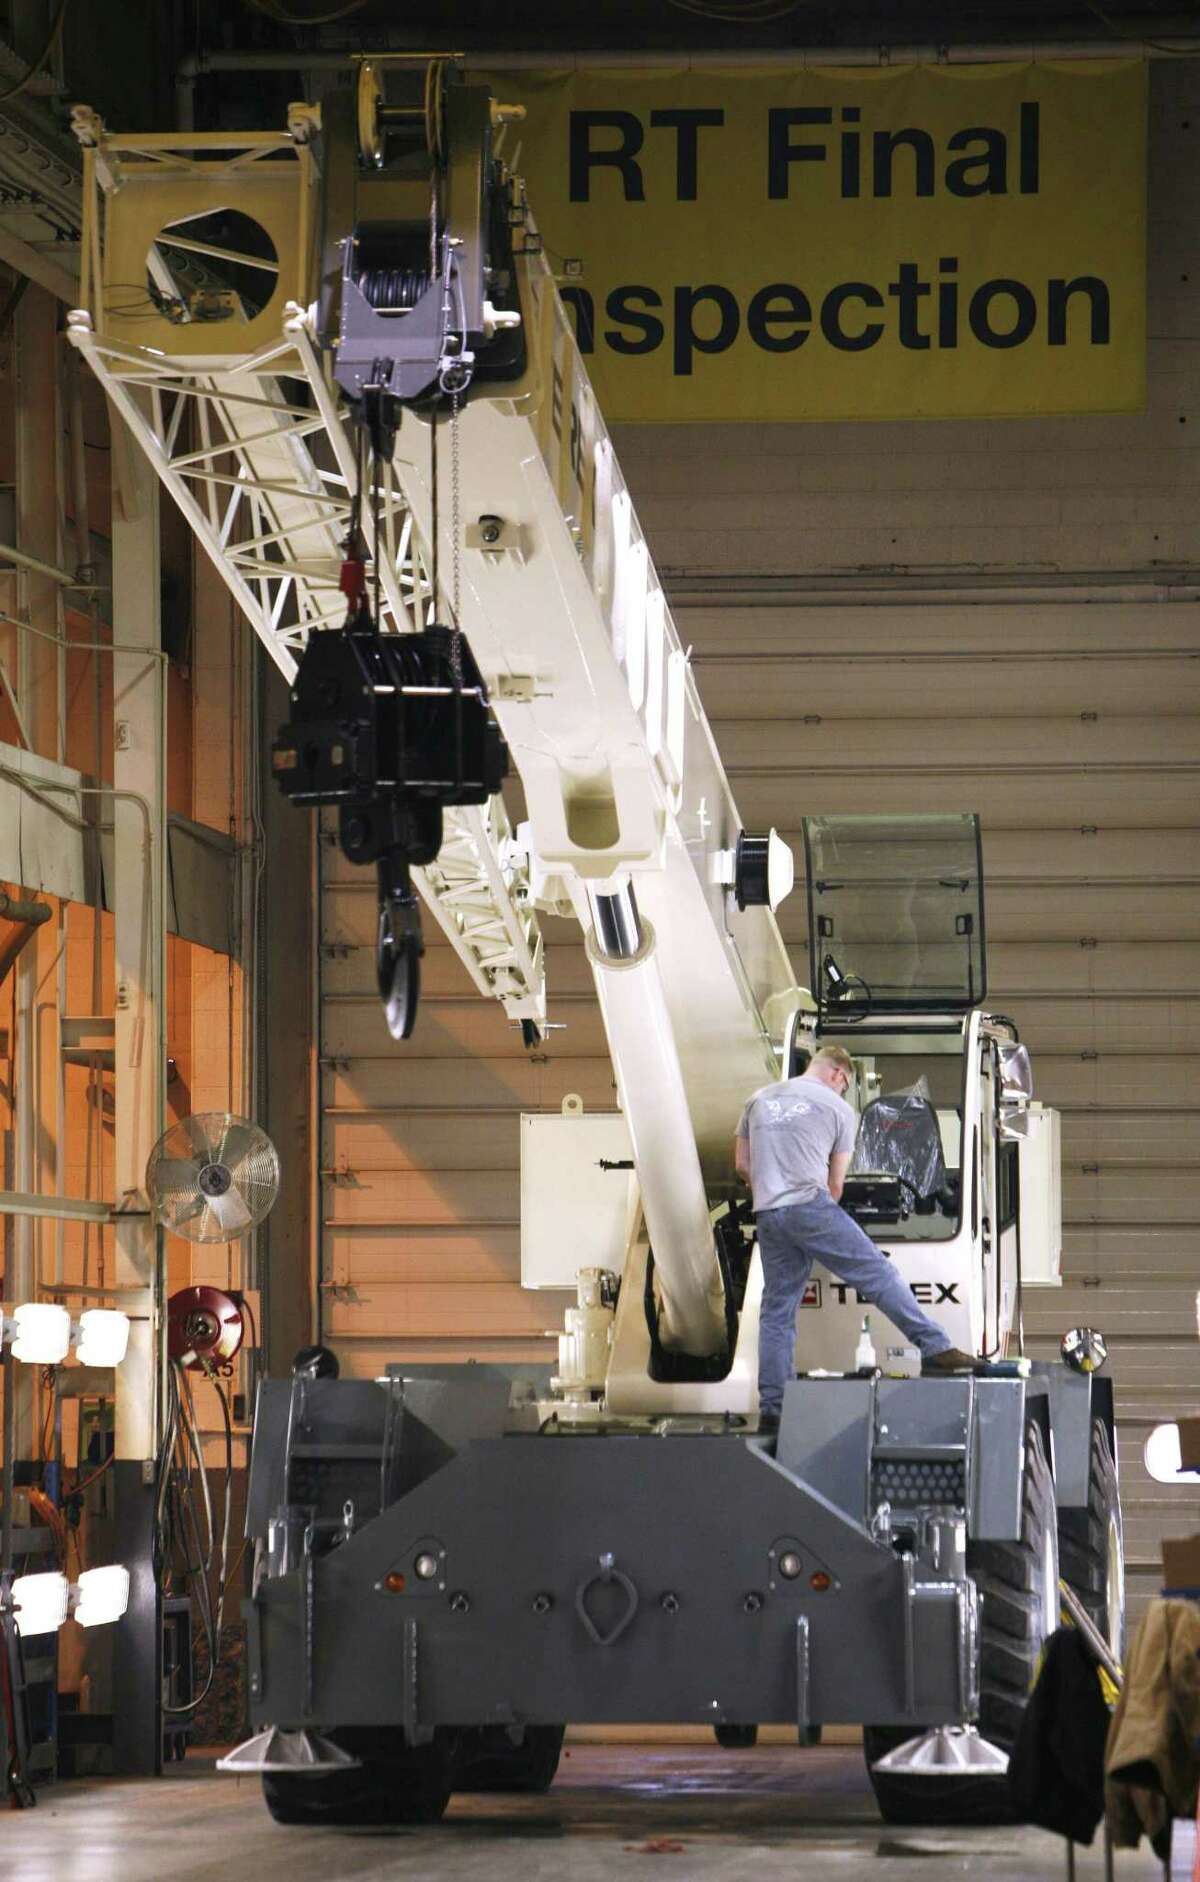 A worker inspects a crane in April 2008 at a Terex plant in Waverly, Iowa, which the company closed in 2016 amid a consolidation of U.S. plants. In 2017 for the first time in two years, Westport, Conn.-based Terex added to its U.S. workforce, with 5,000 workers as of December from 4,900 the year before. (AP Photo/Charlie Neibergall)